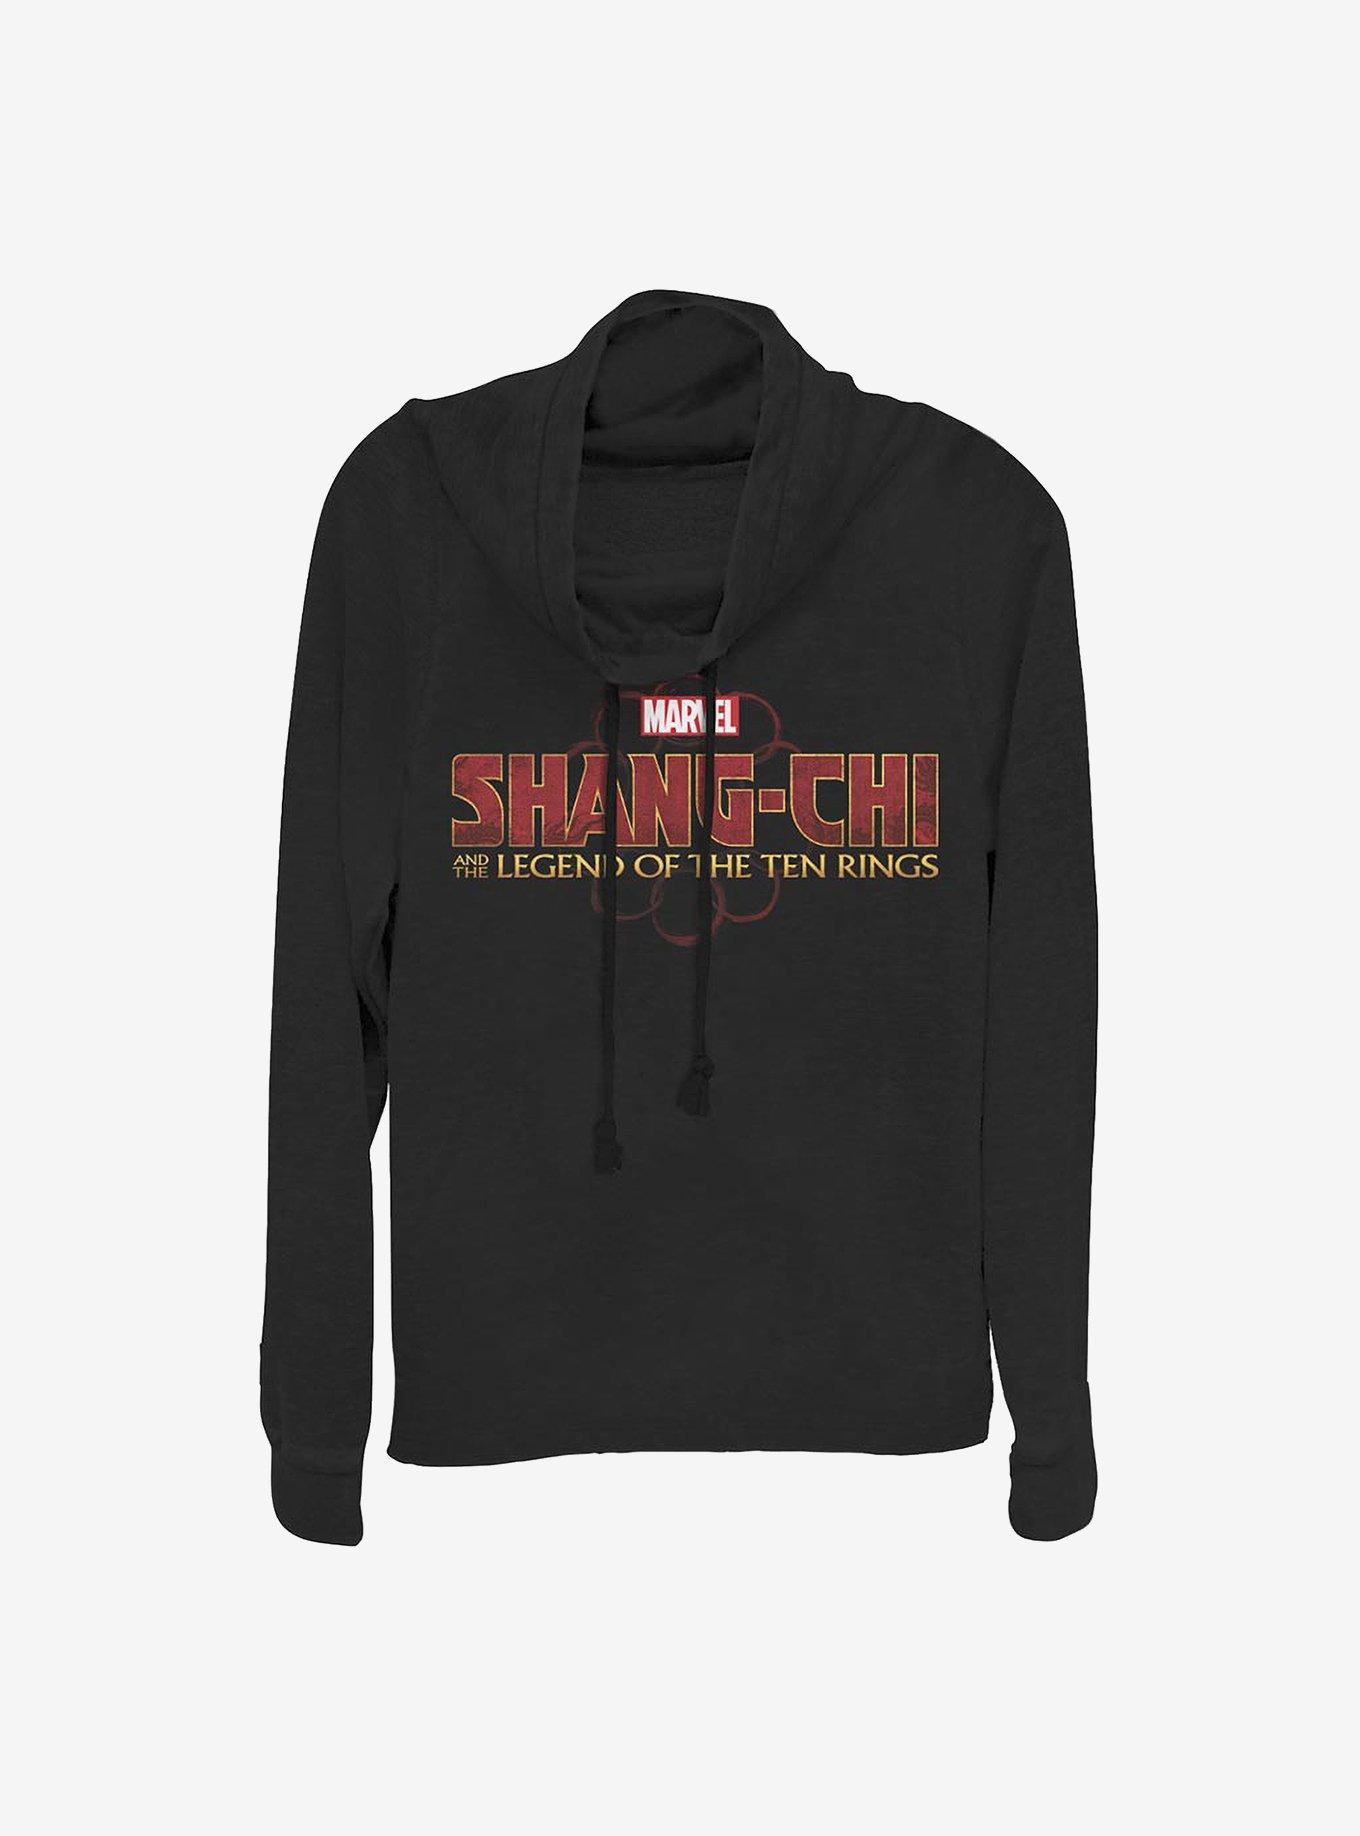 Marvel Shang-Chi And The Legend Of The Ten Rings Title Cowlneck Long-Sleeve Girls Top, BLACK, hi-res